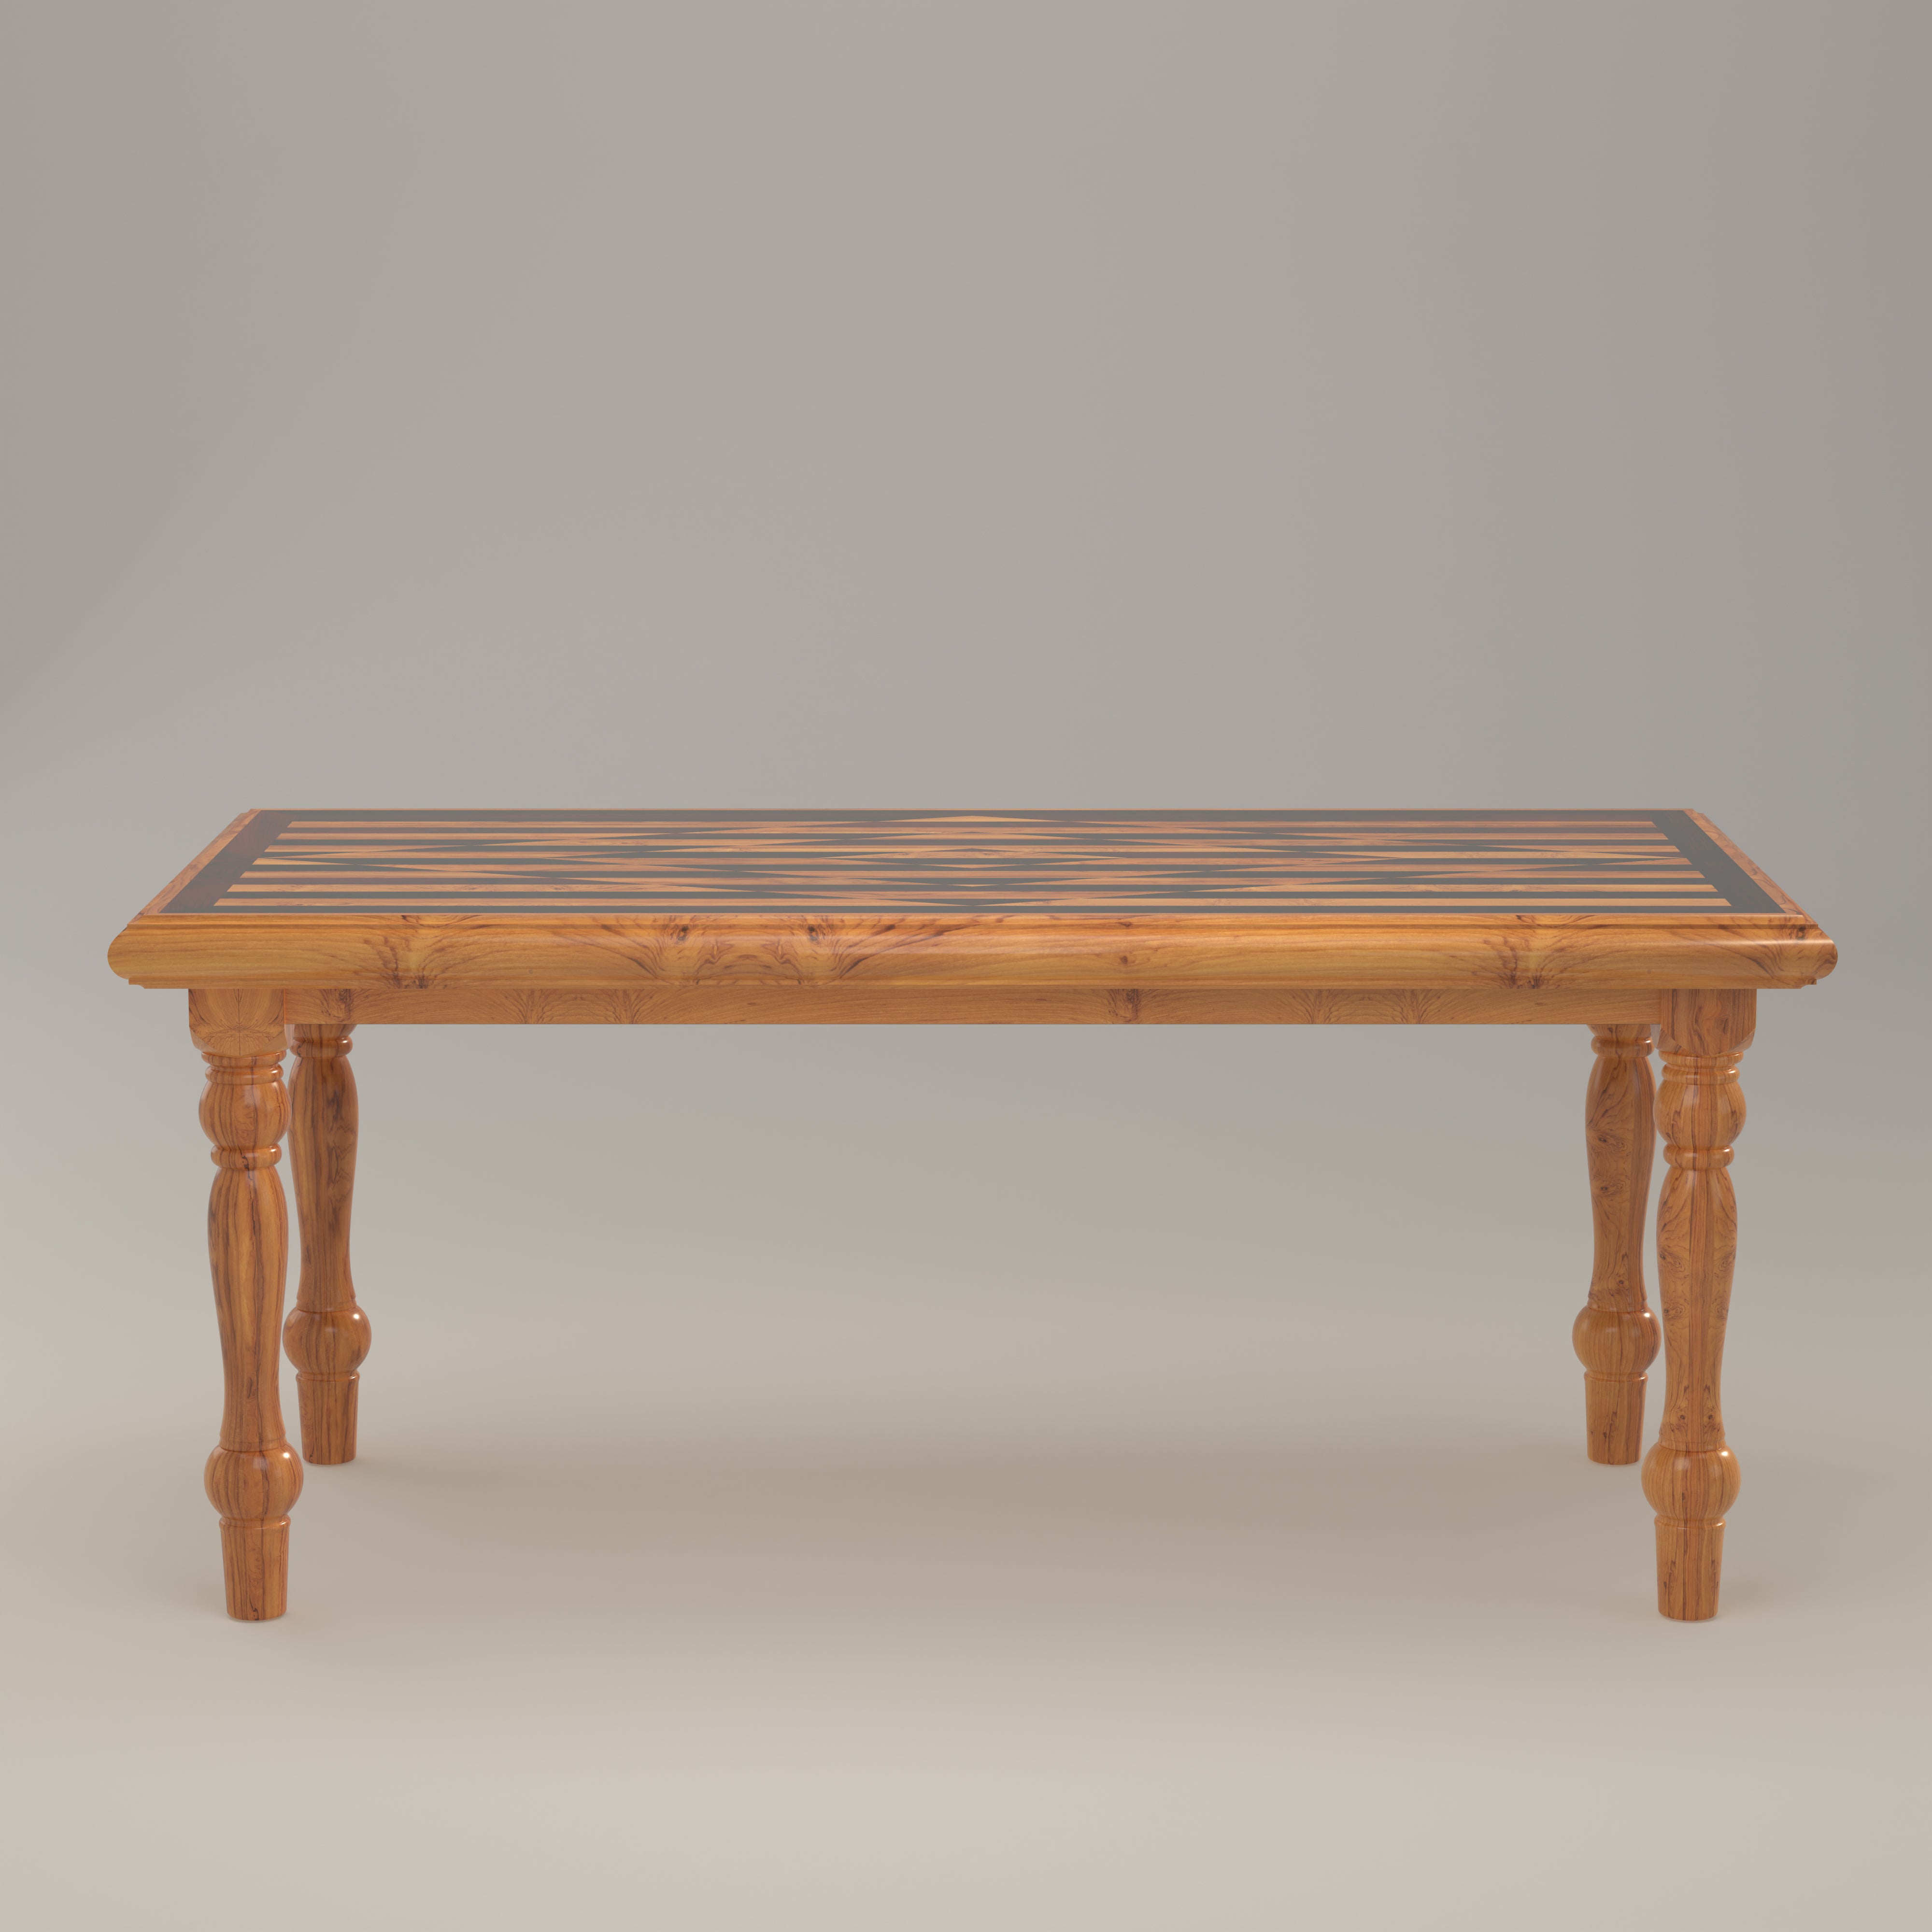 Elegant Top Strip Style Teak Wooden Dining Table Dining Table